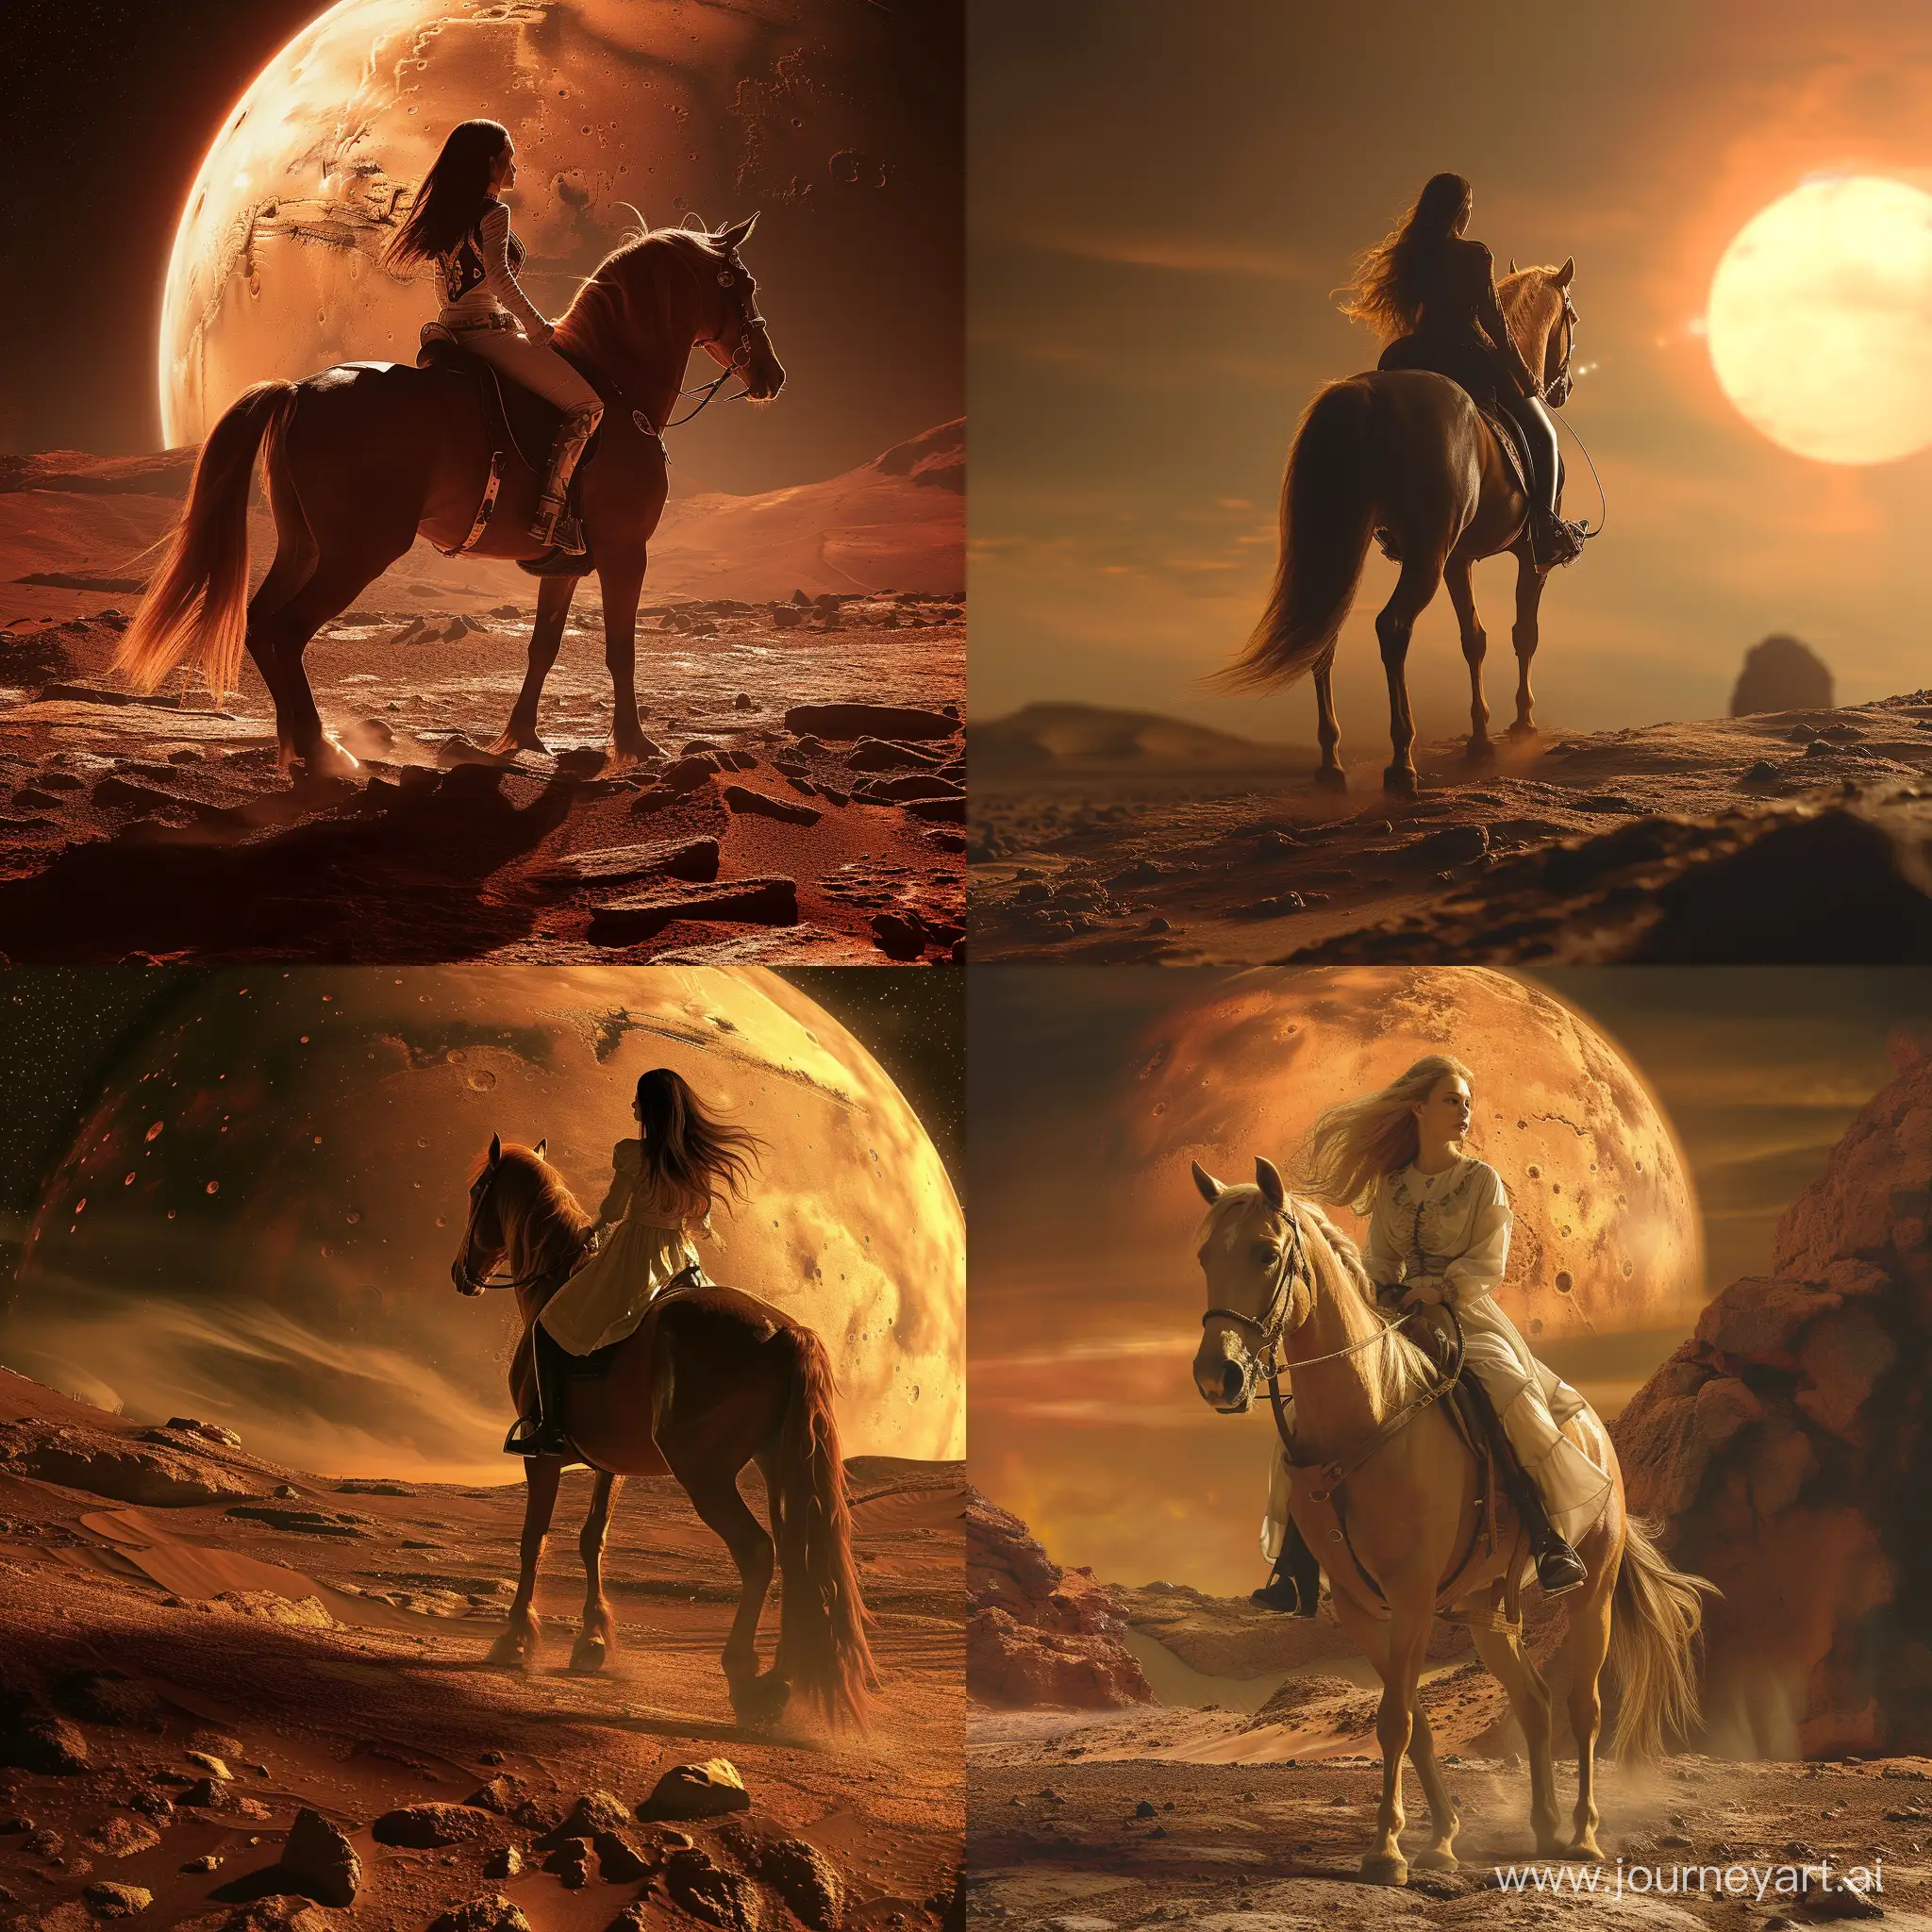 Equestrian-Adventure-Stunning-Girl-Riding-a-Majestic-Horse-on-the-Enchanting-Mars-Landscape